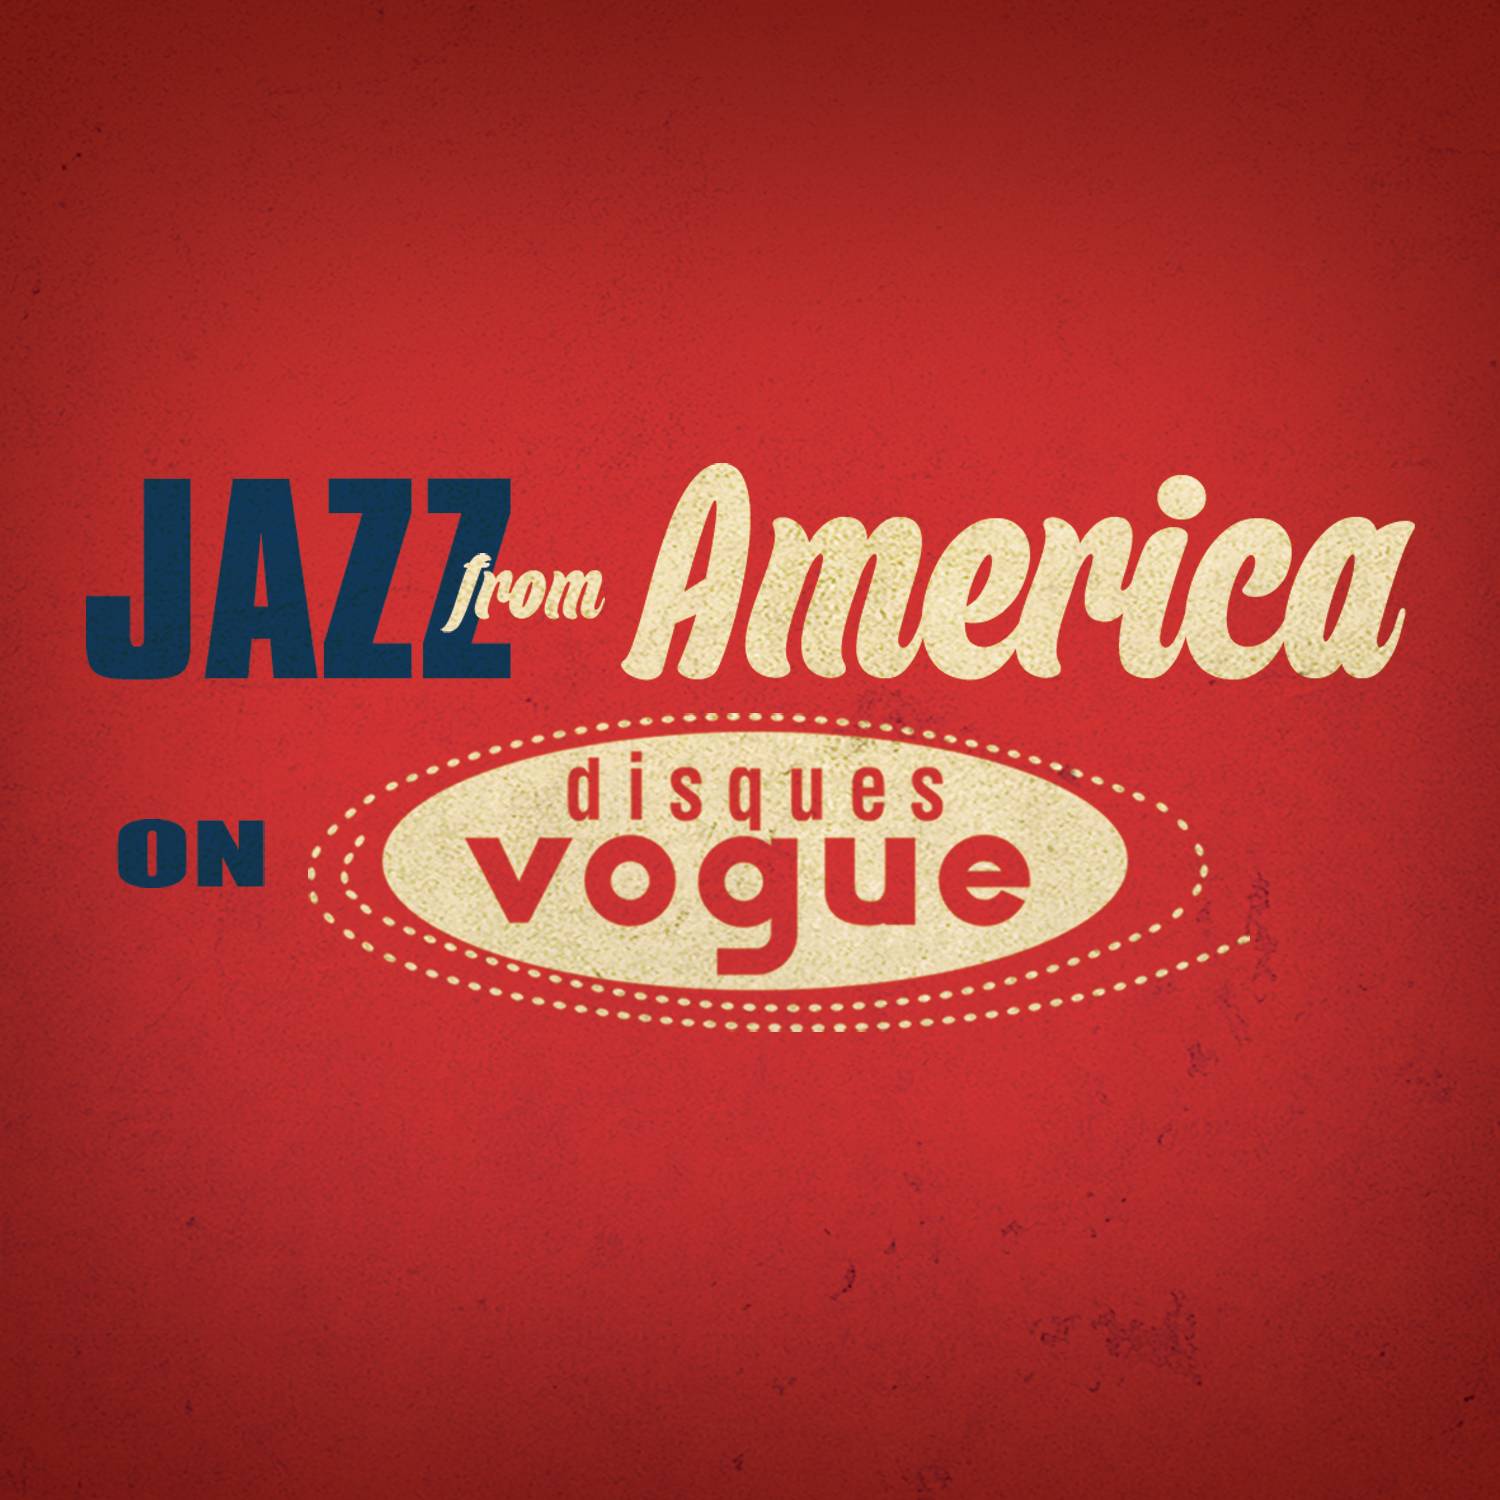 Jazz From America on Disques Vogue